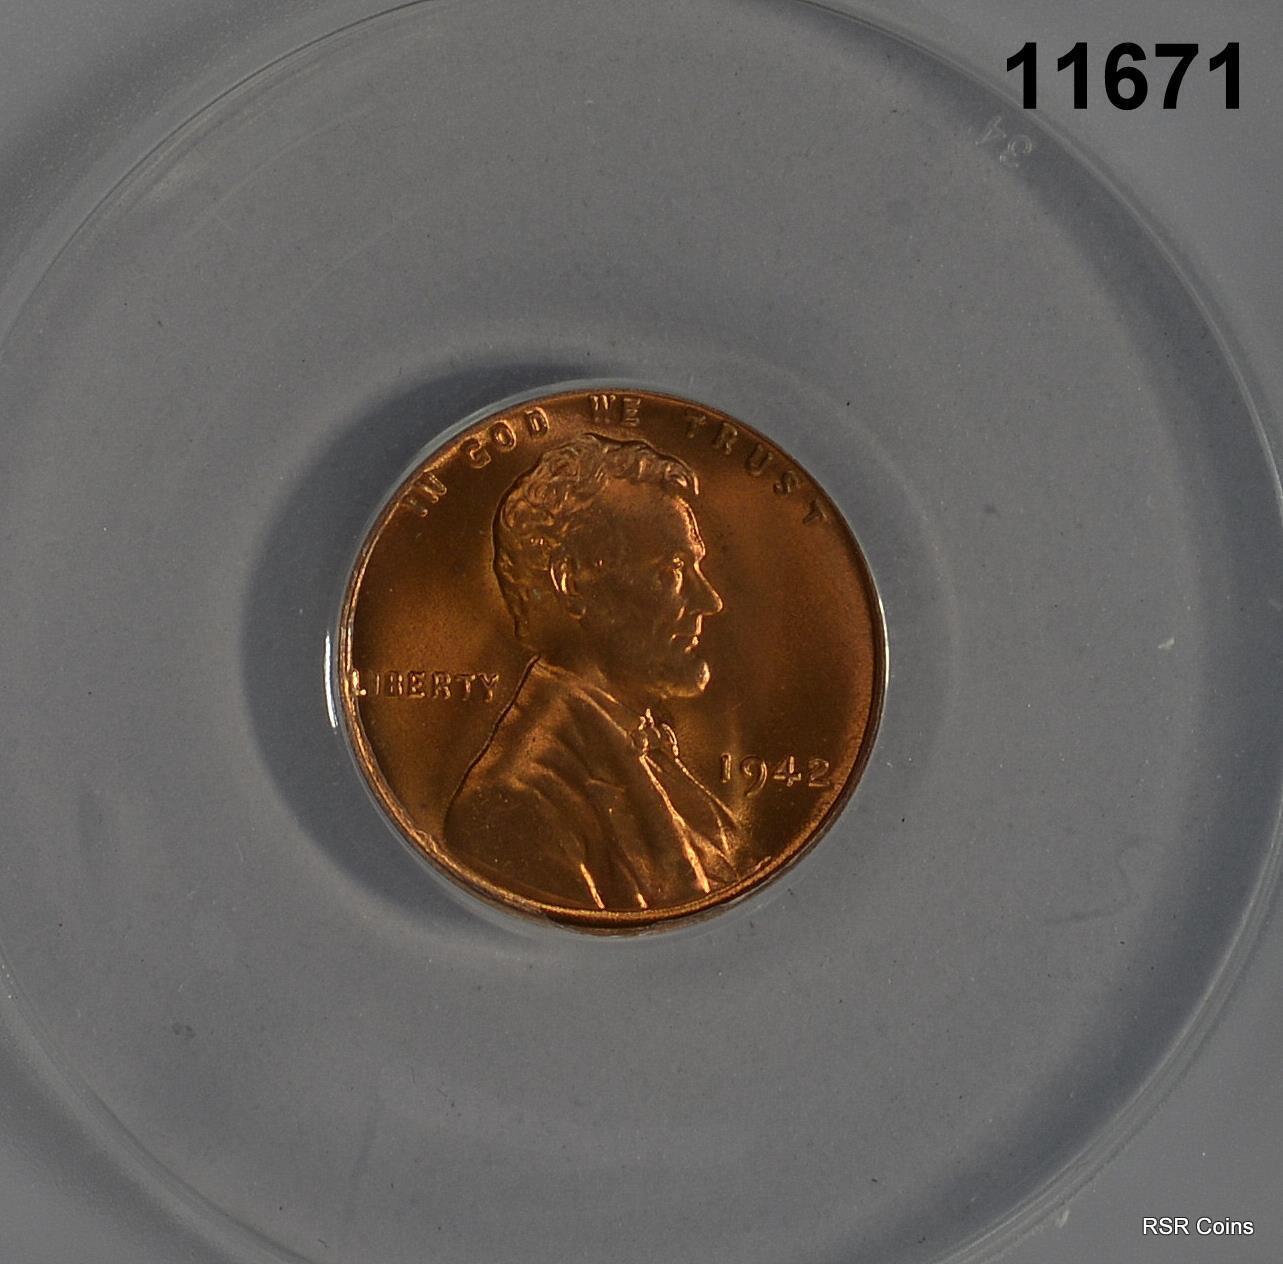 1942 LINCOLN WHEAT CENT ANACS CERTIFIED MS66 RED FLASHY! #11671